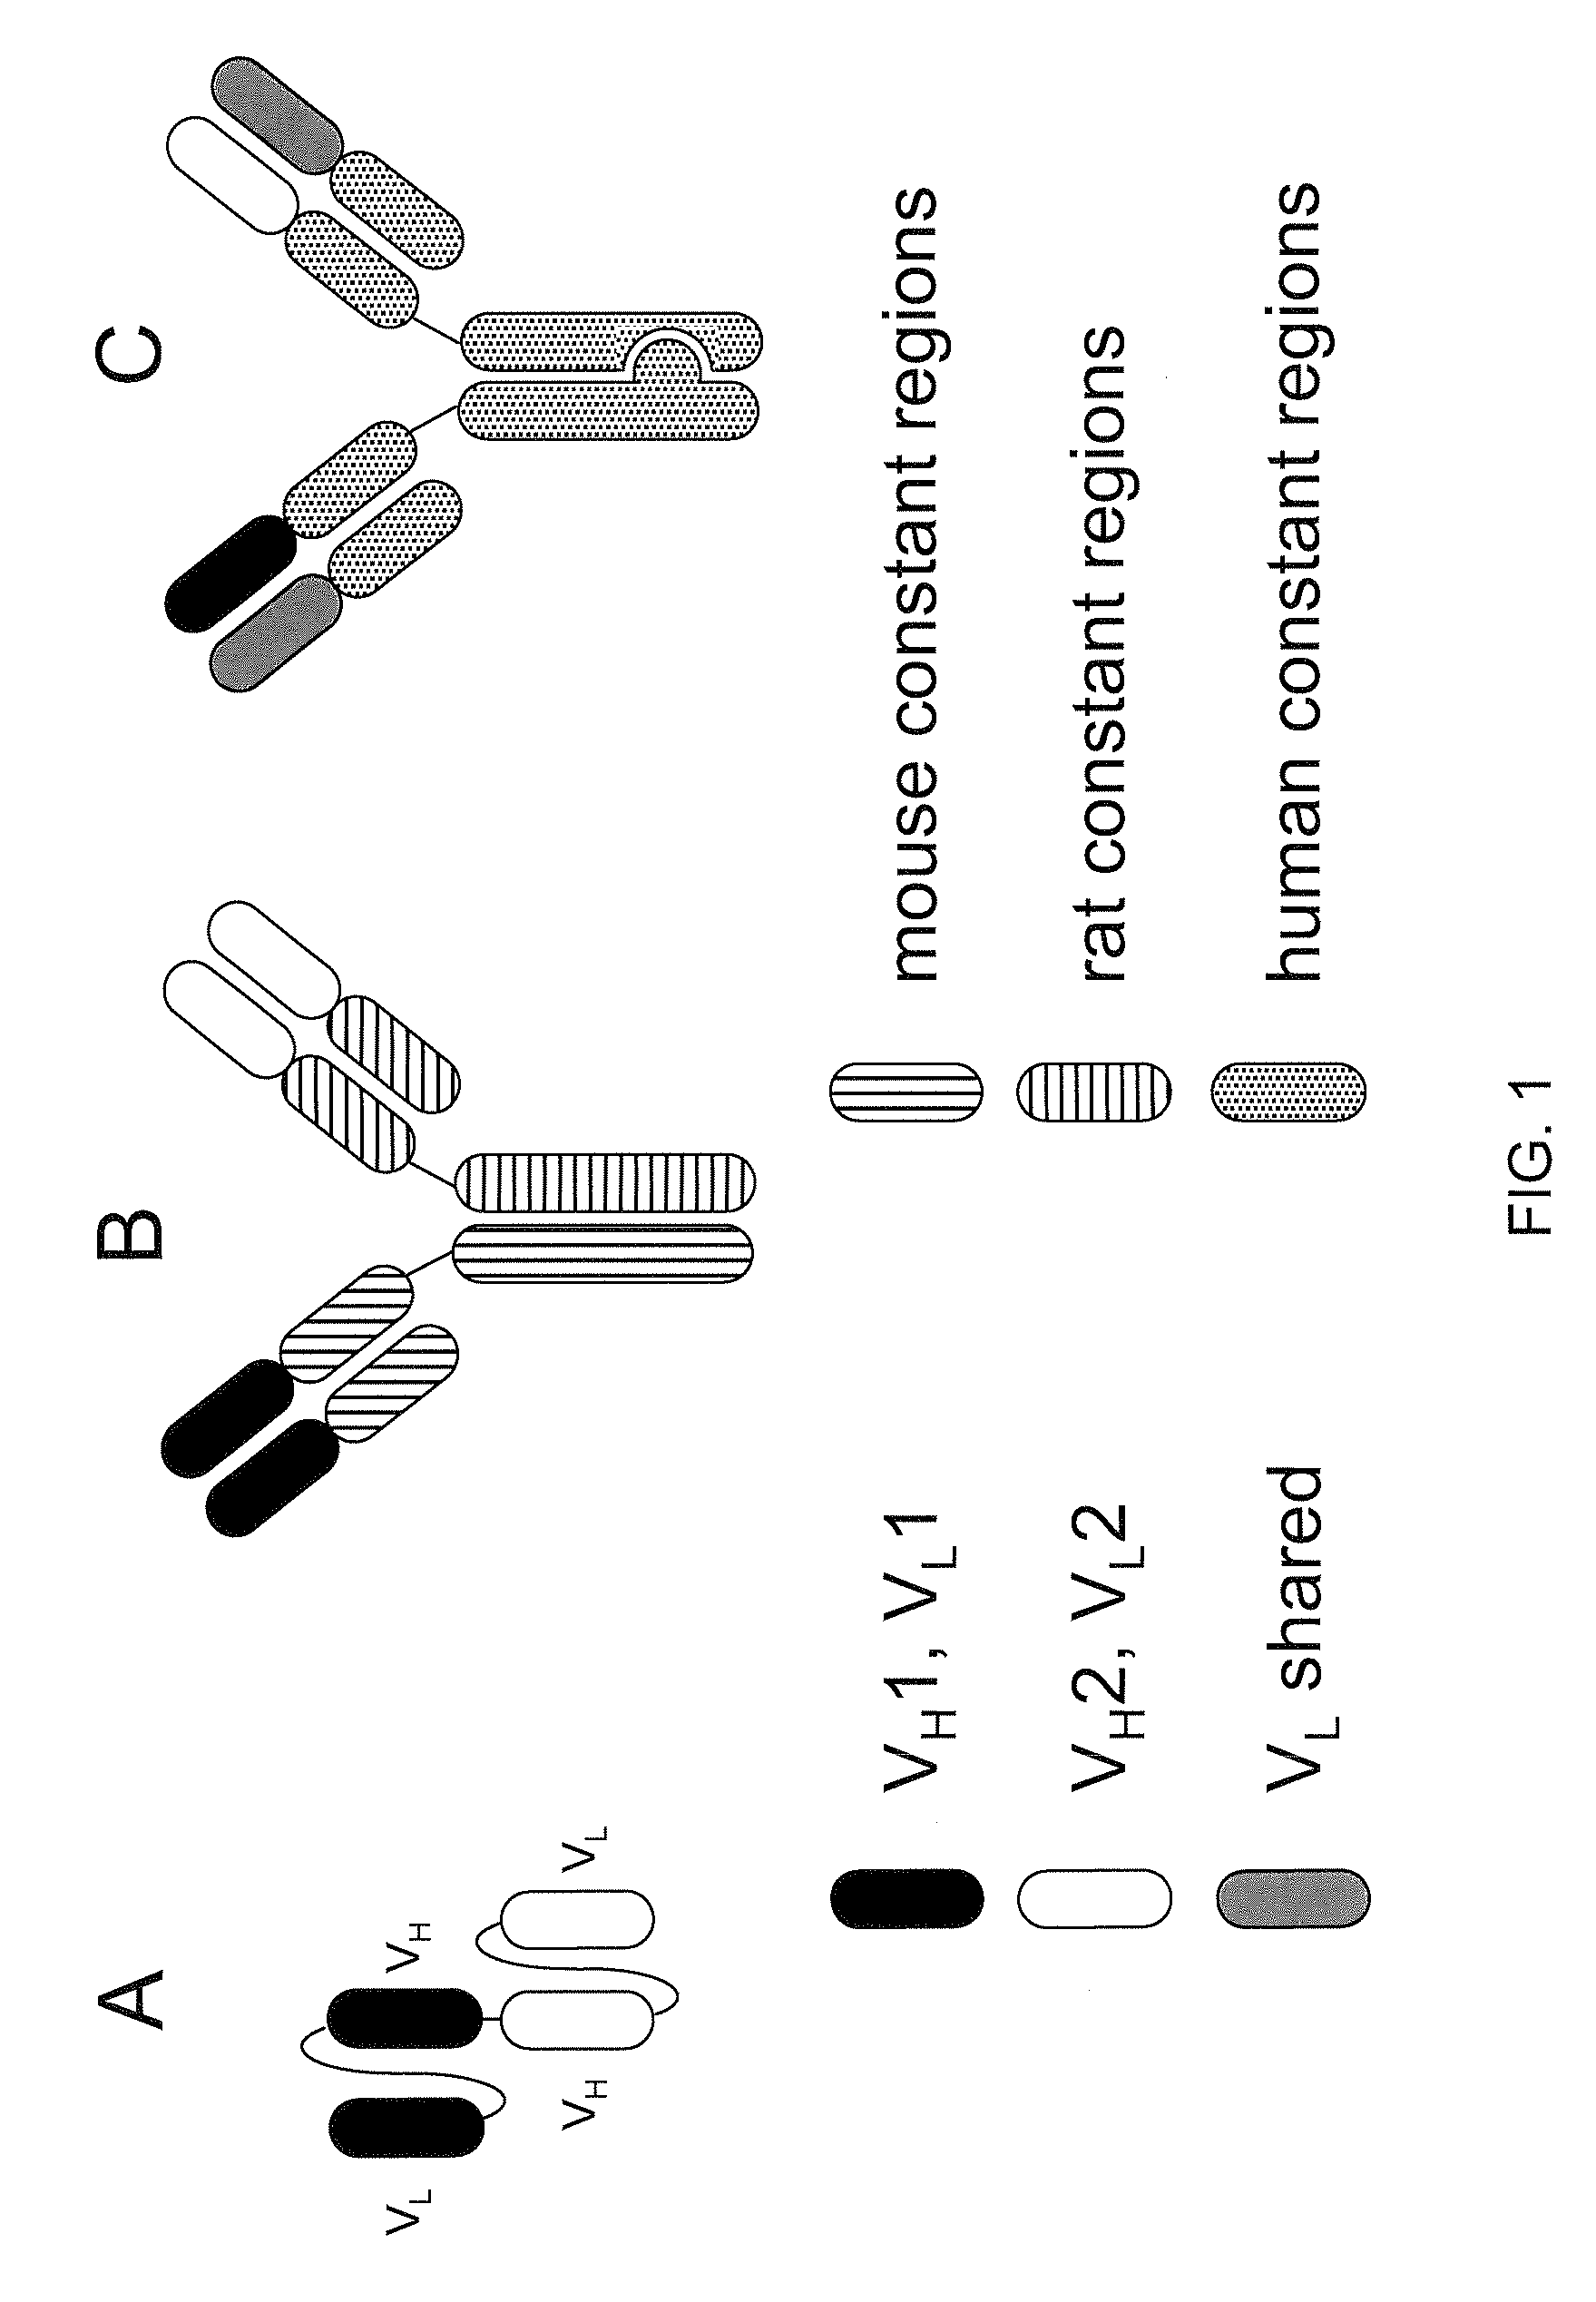 Readily Isolated Bispecific Antibodies with Native Immunoglobulin Format